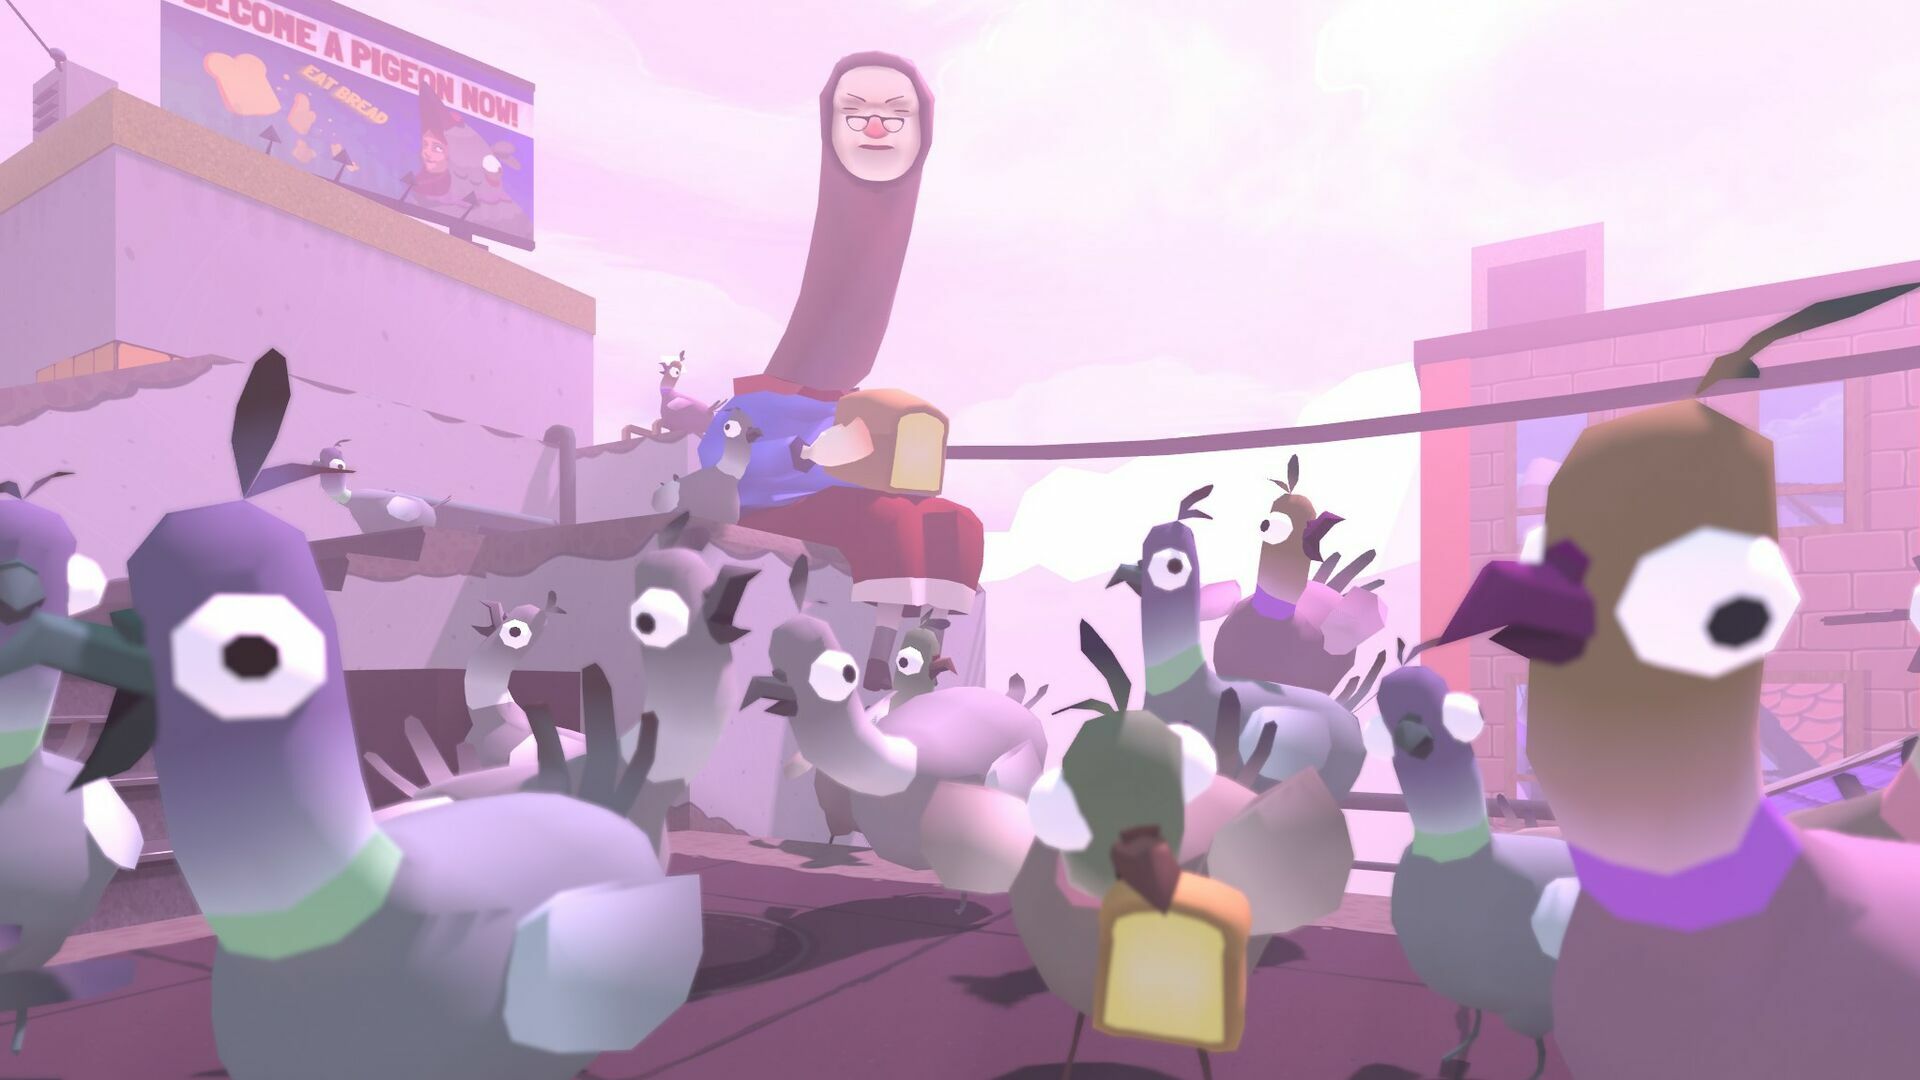 Still from the Game VR Pigeons